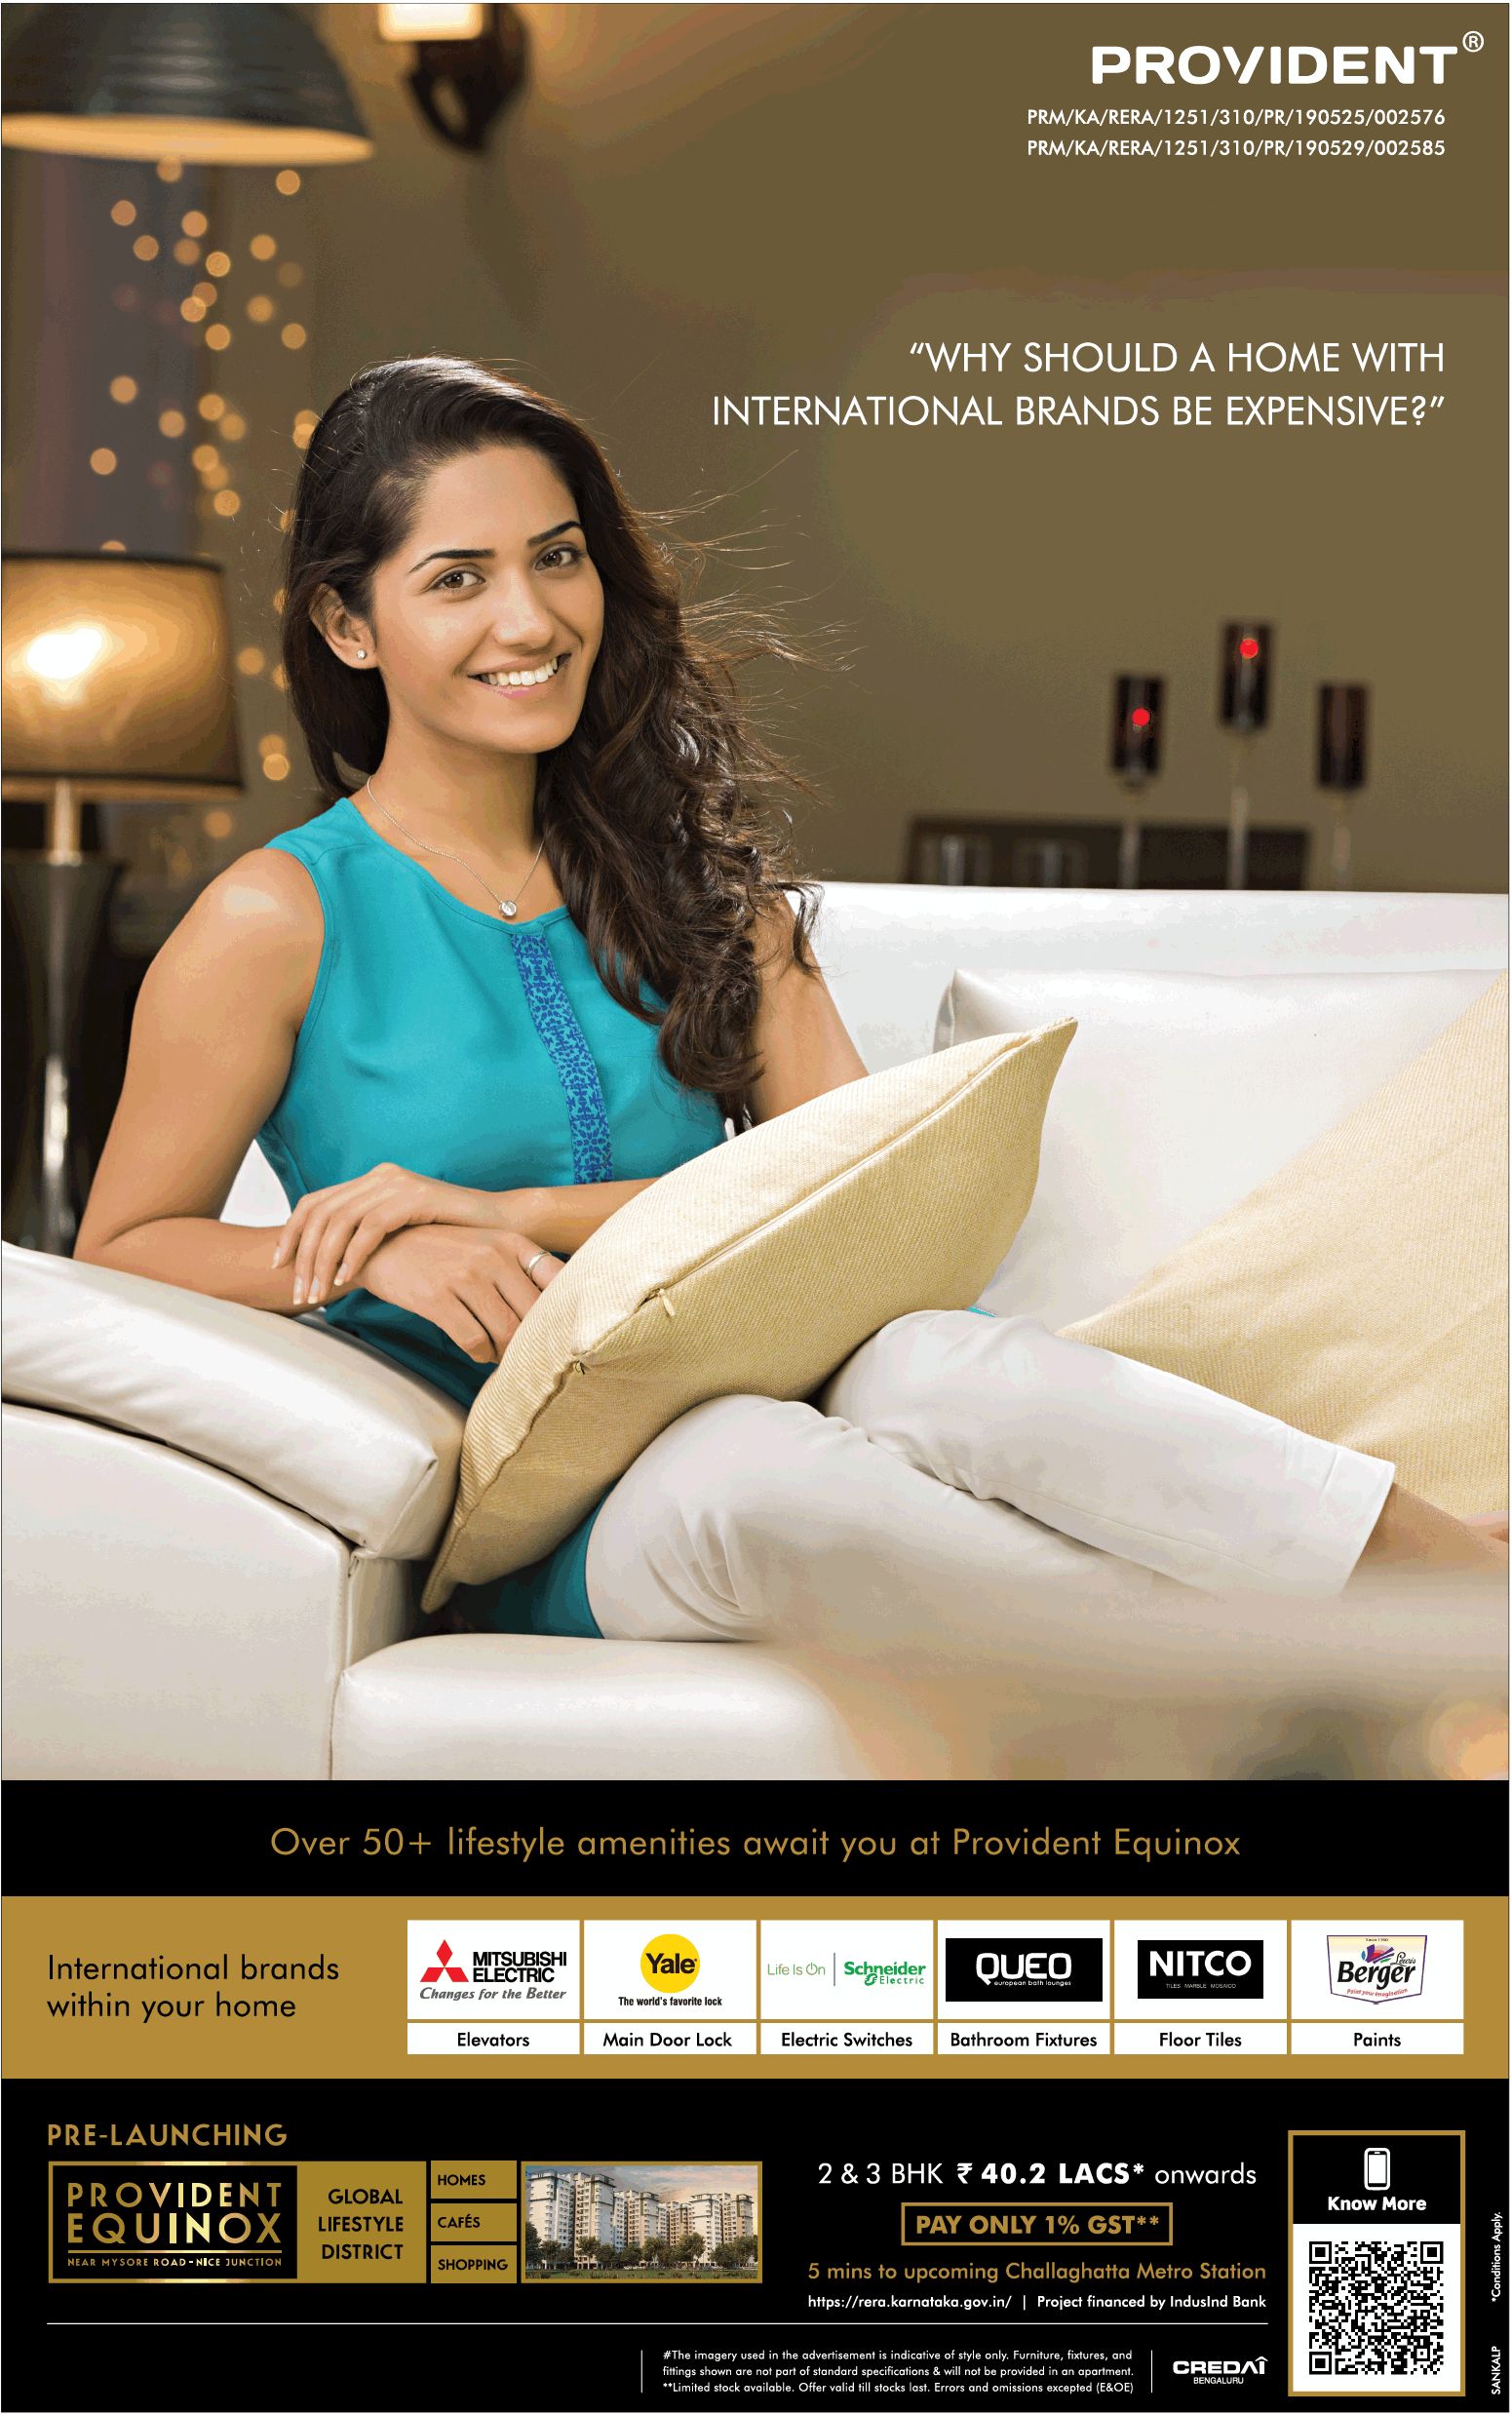 Over 50+ lifestyle amenities await you at Provident Equinox in Bangalore